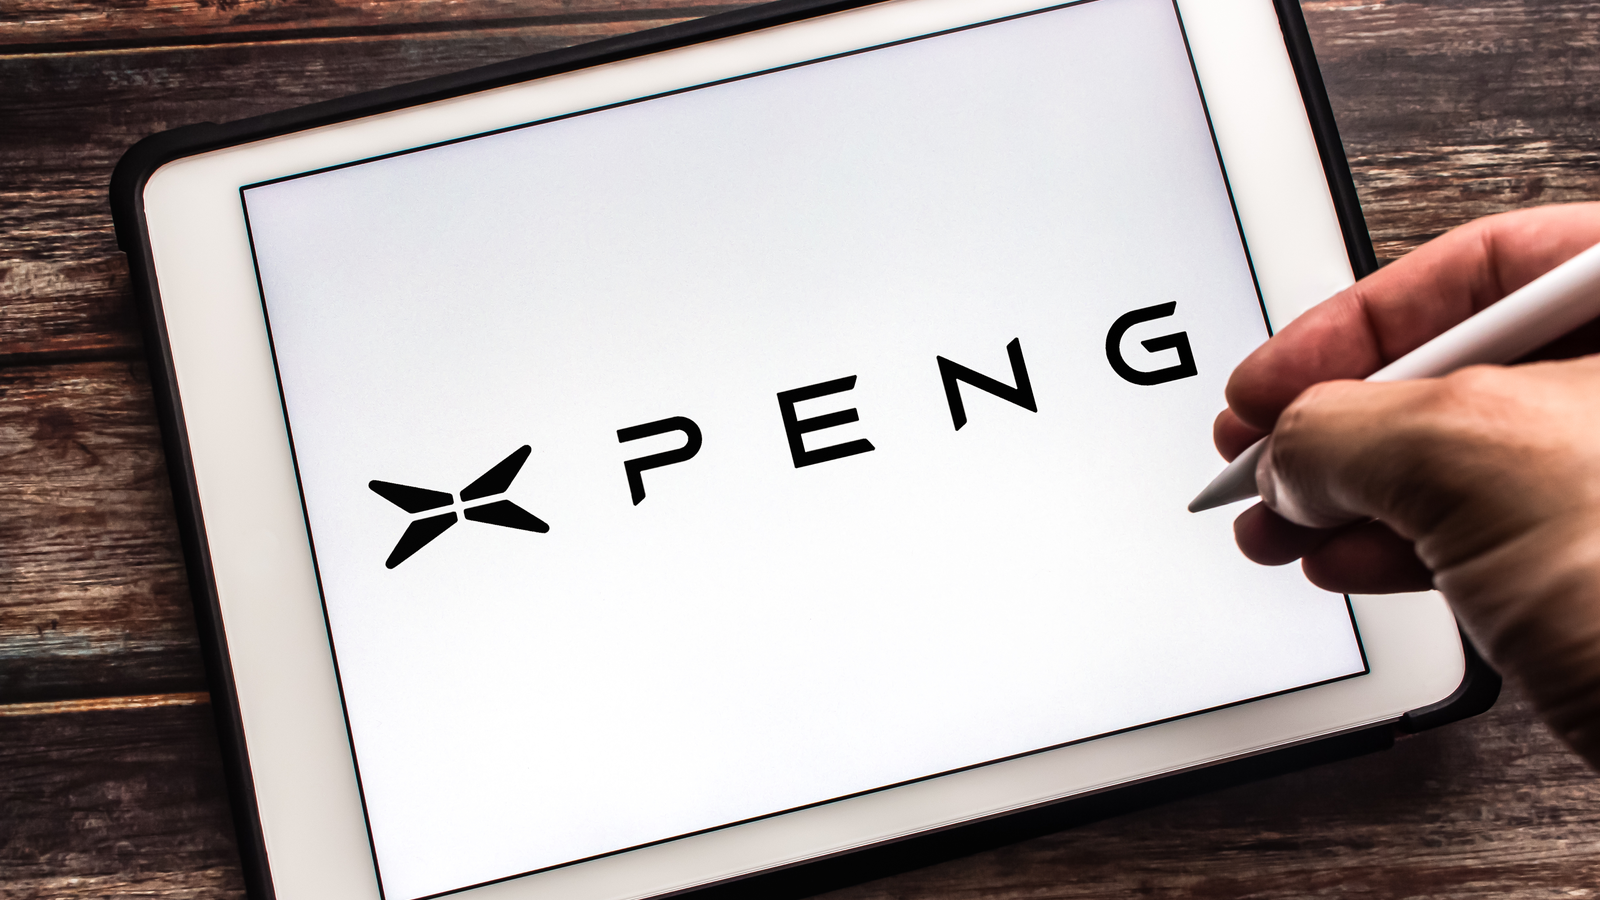 Why Is Xpeng (XPEV) Stock Down 6% Today?